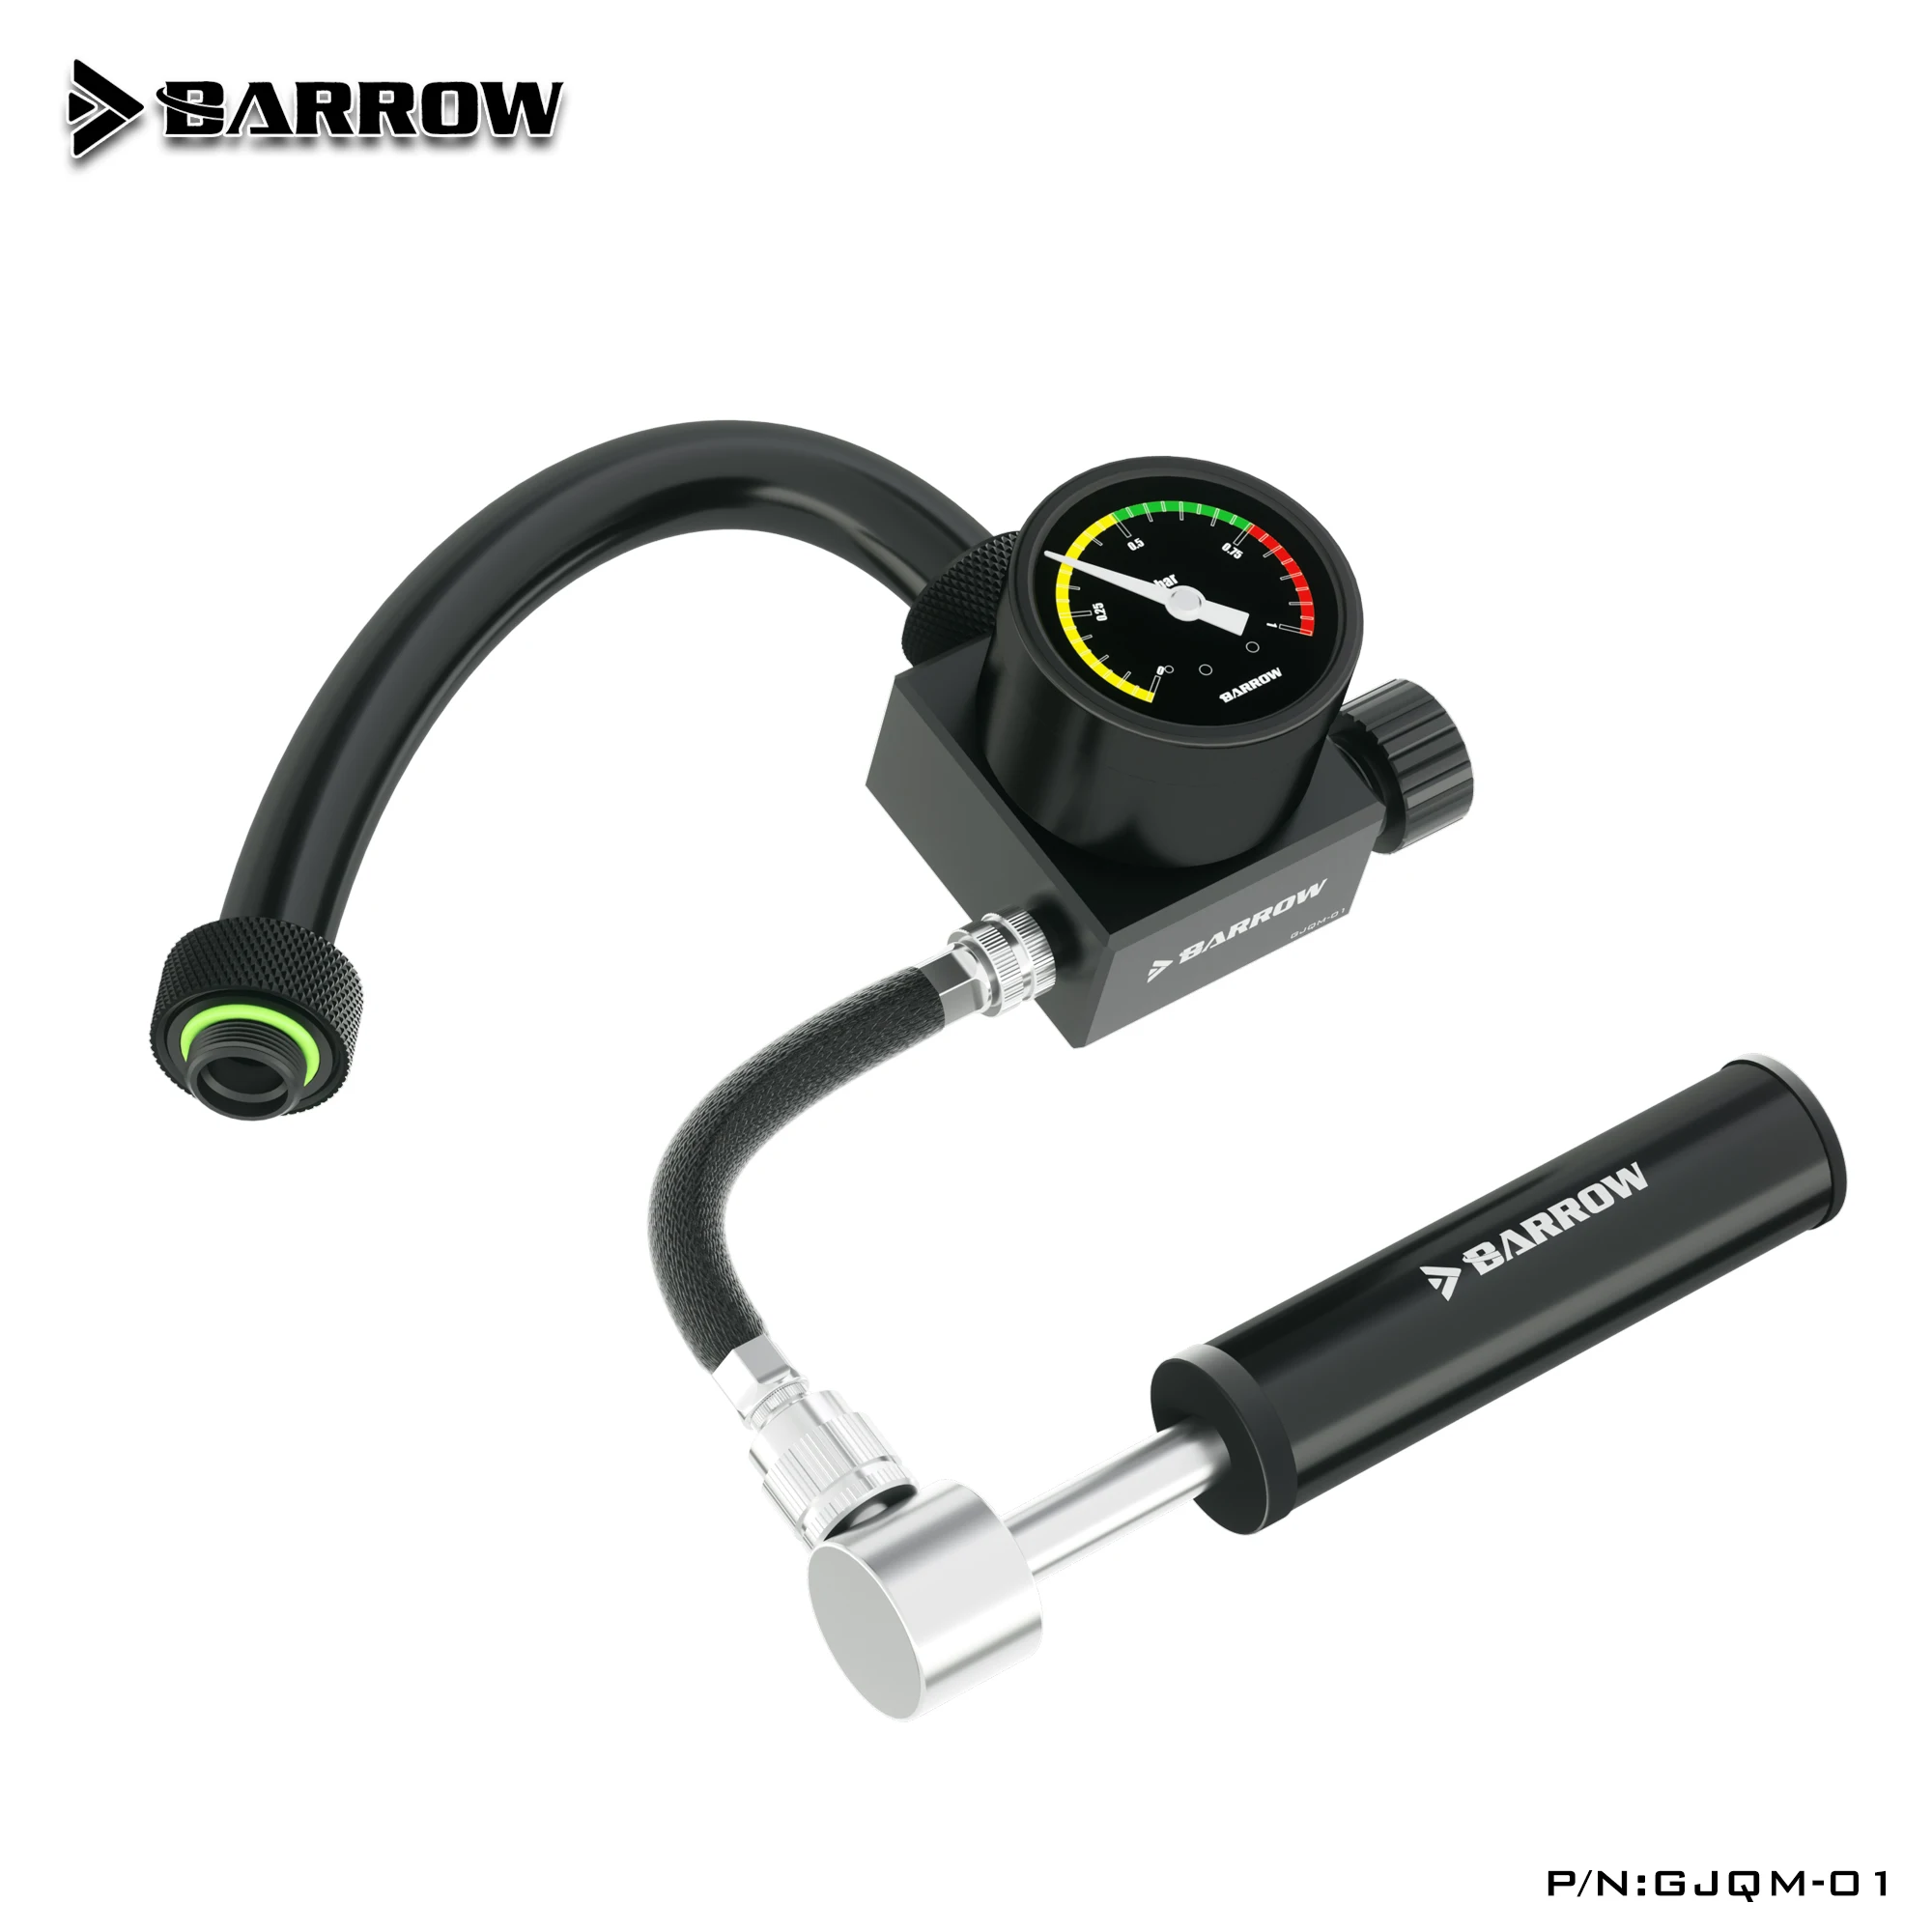 Barrow GJQM-01 PC Water Cooling  Water proof Leak proof Seal Tester Air Pressure Test Tools Test System Computer